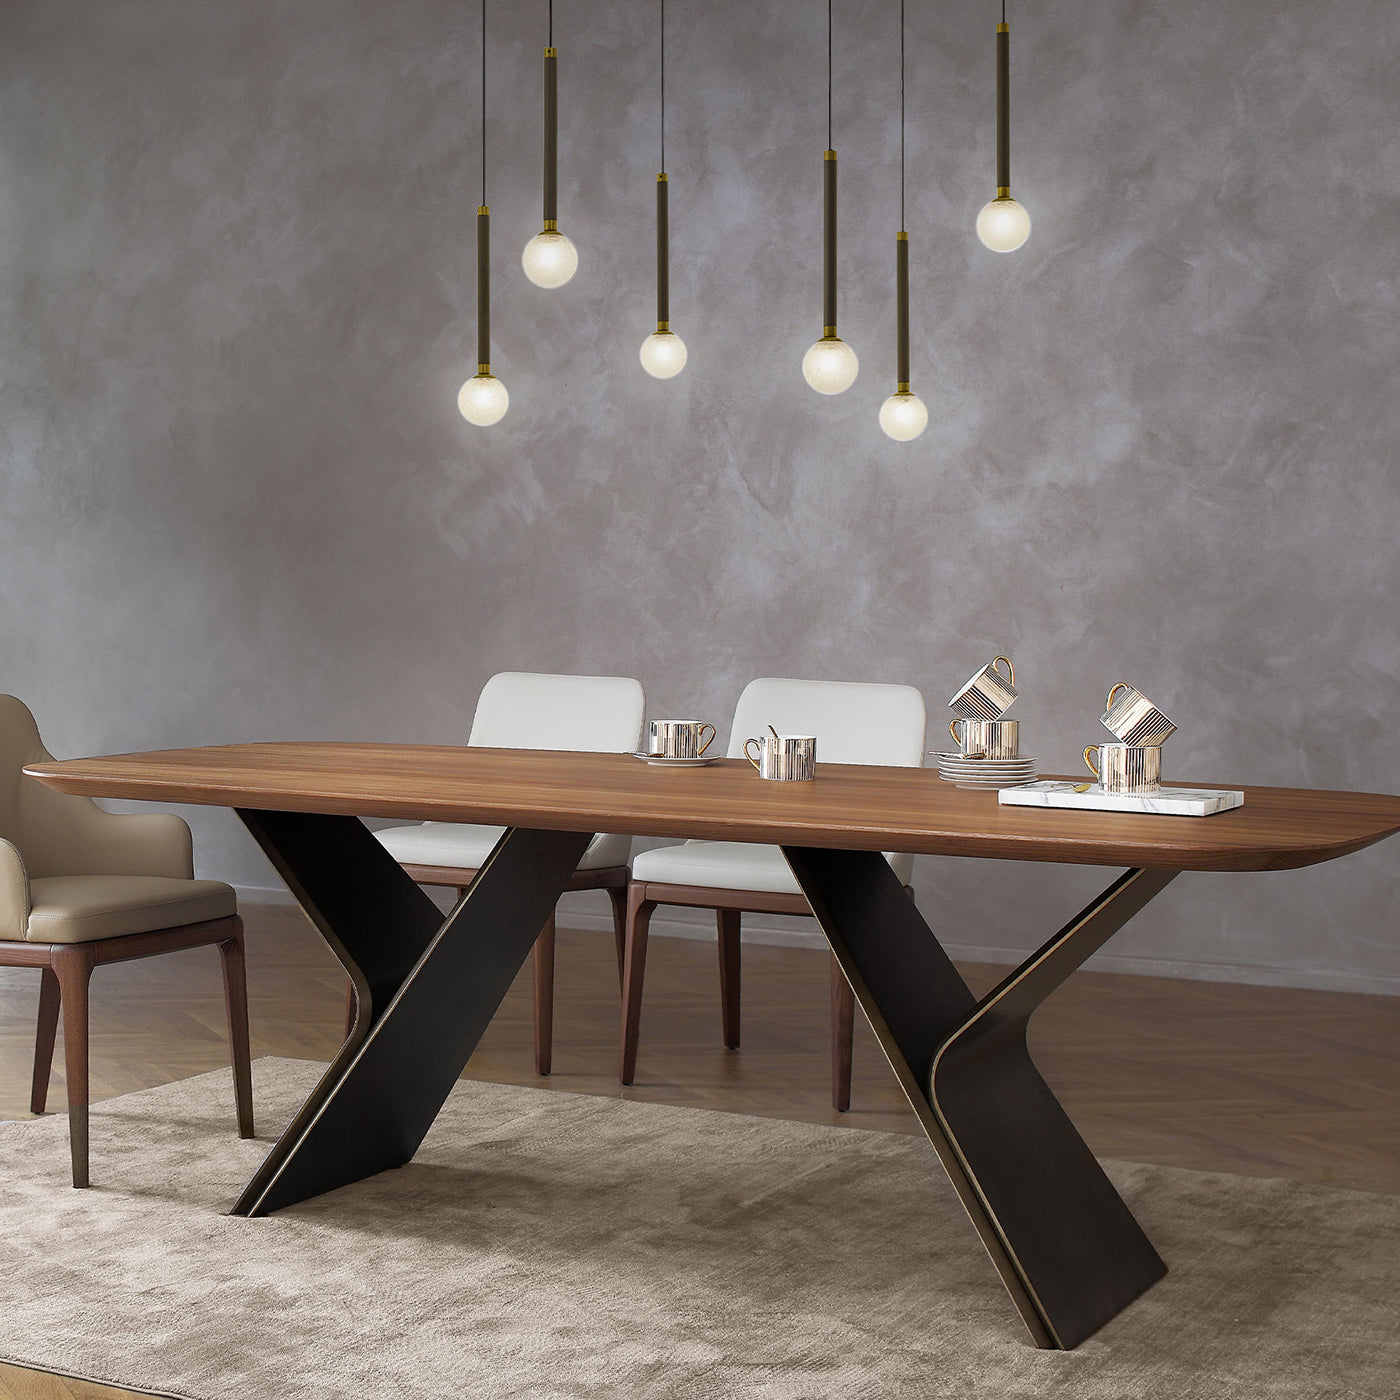 Metaverso Canaletto Walnut Wood Table - Alternative view 1